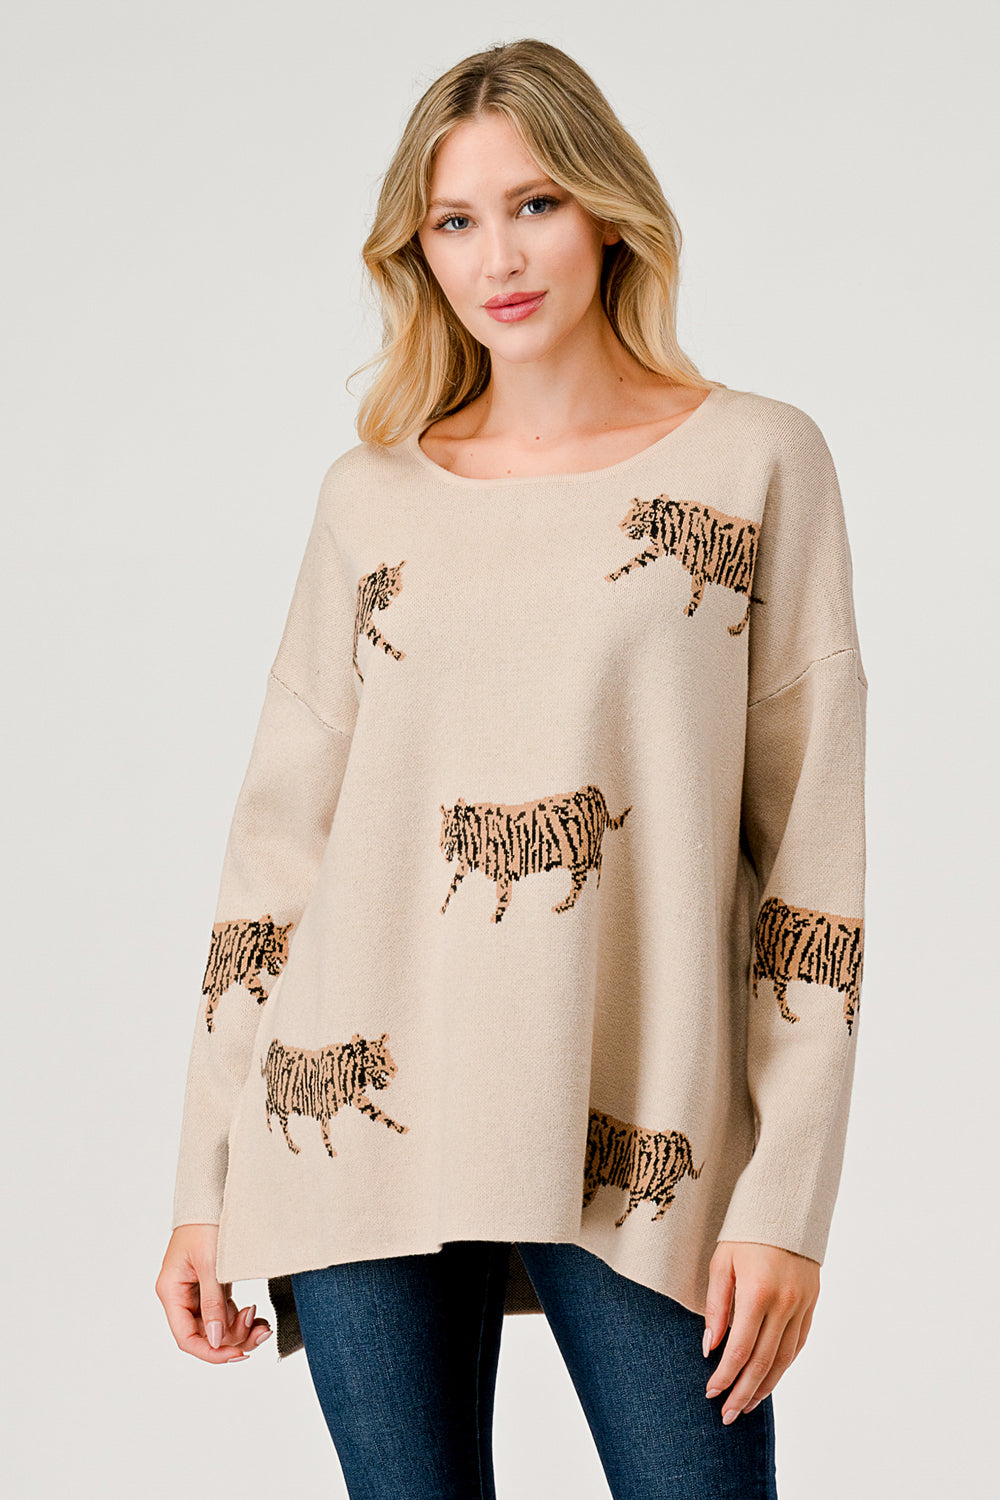 Mbt-3065 Tiger Sweater Top Heather Oatmeal  - $26.95 ea